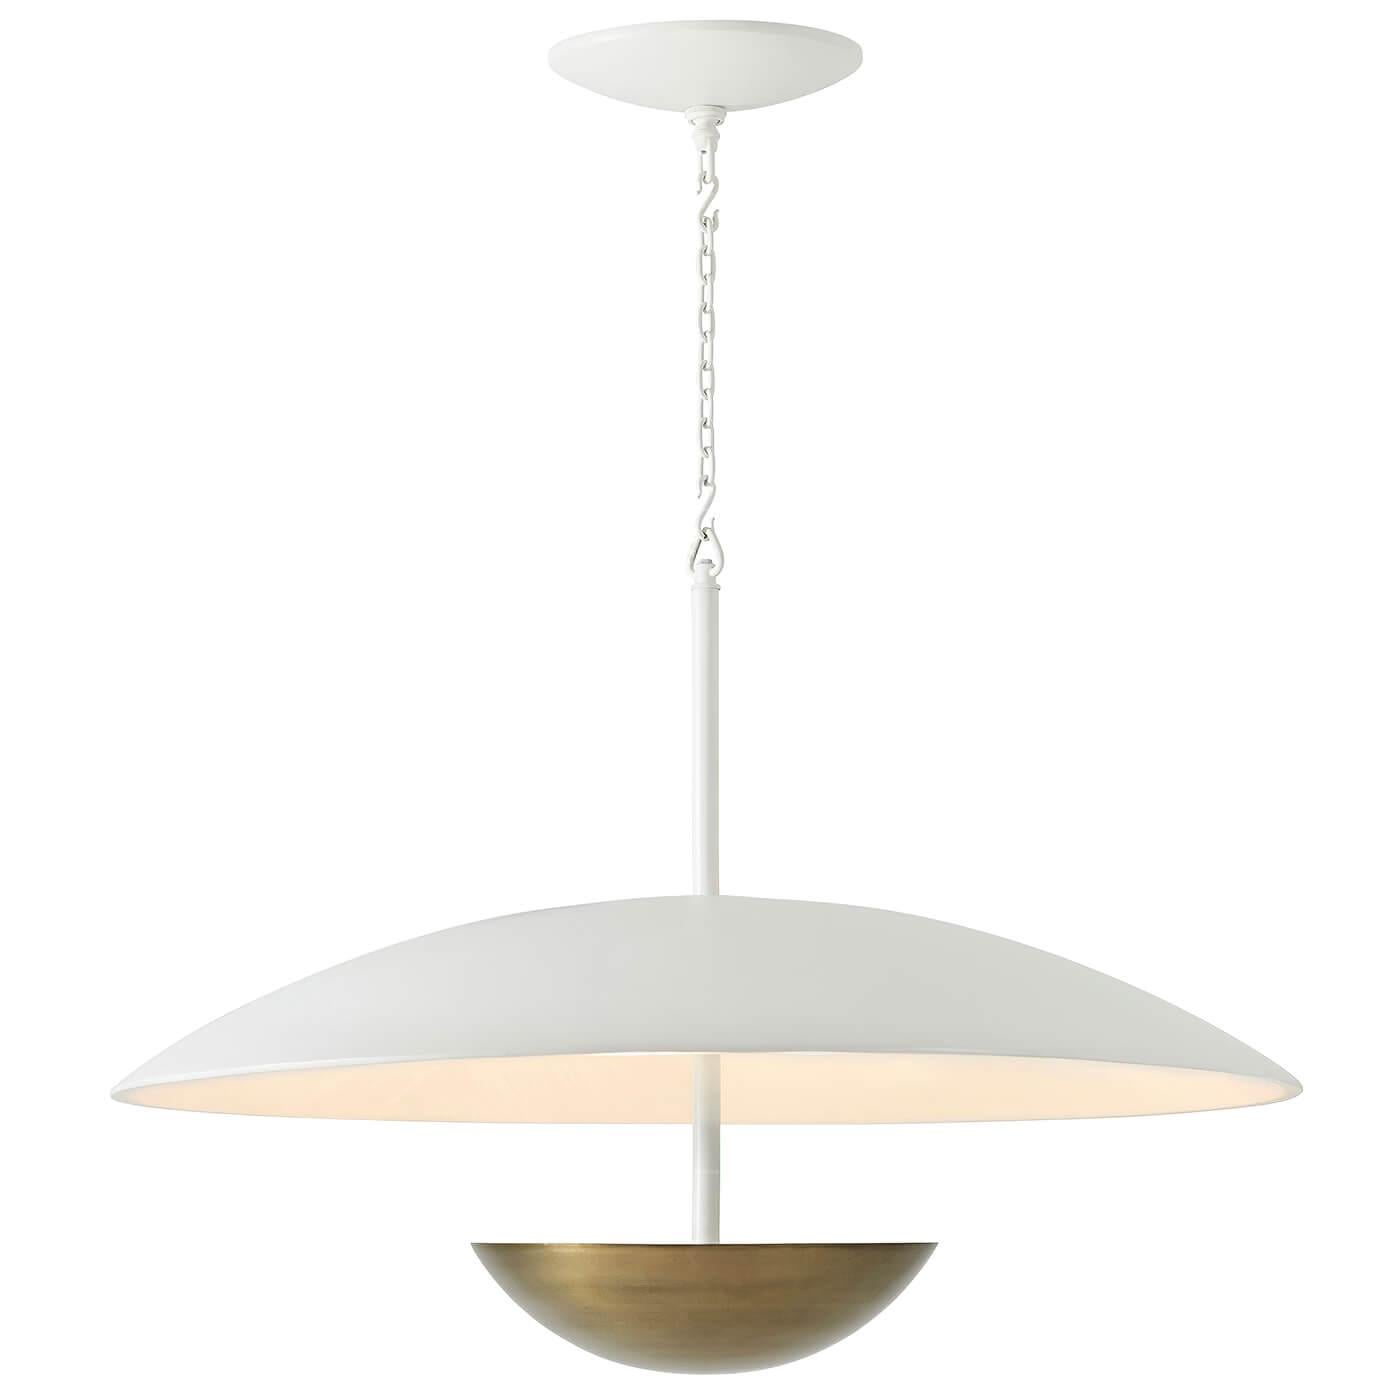 Modern bowl chandelier with a textured white composite canopy above a bronze-finished steel bowl. With a painted chain and ceiling canopy.

Dimensions: 43